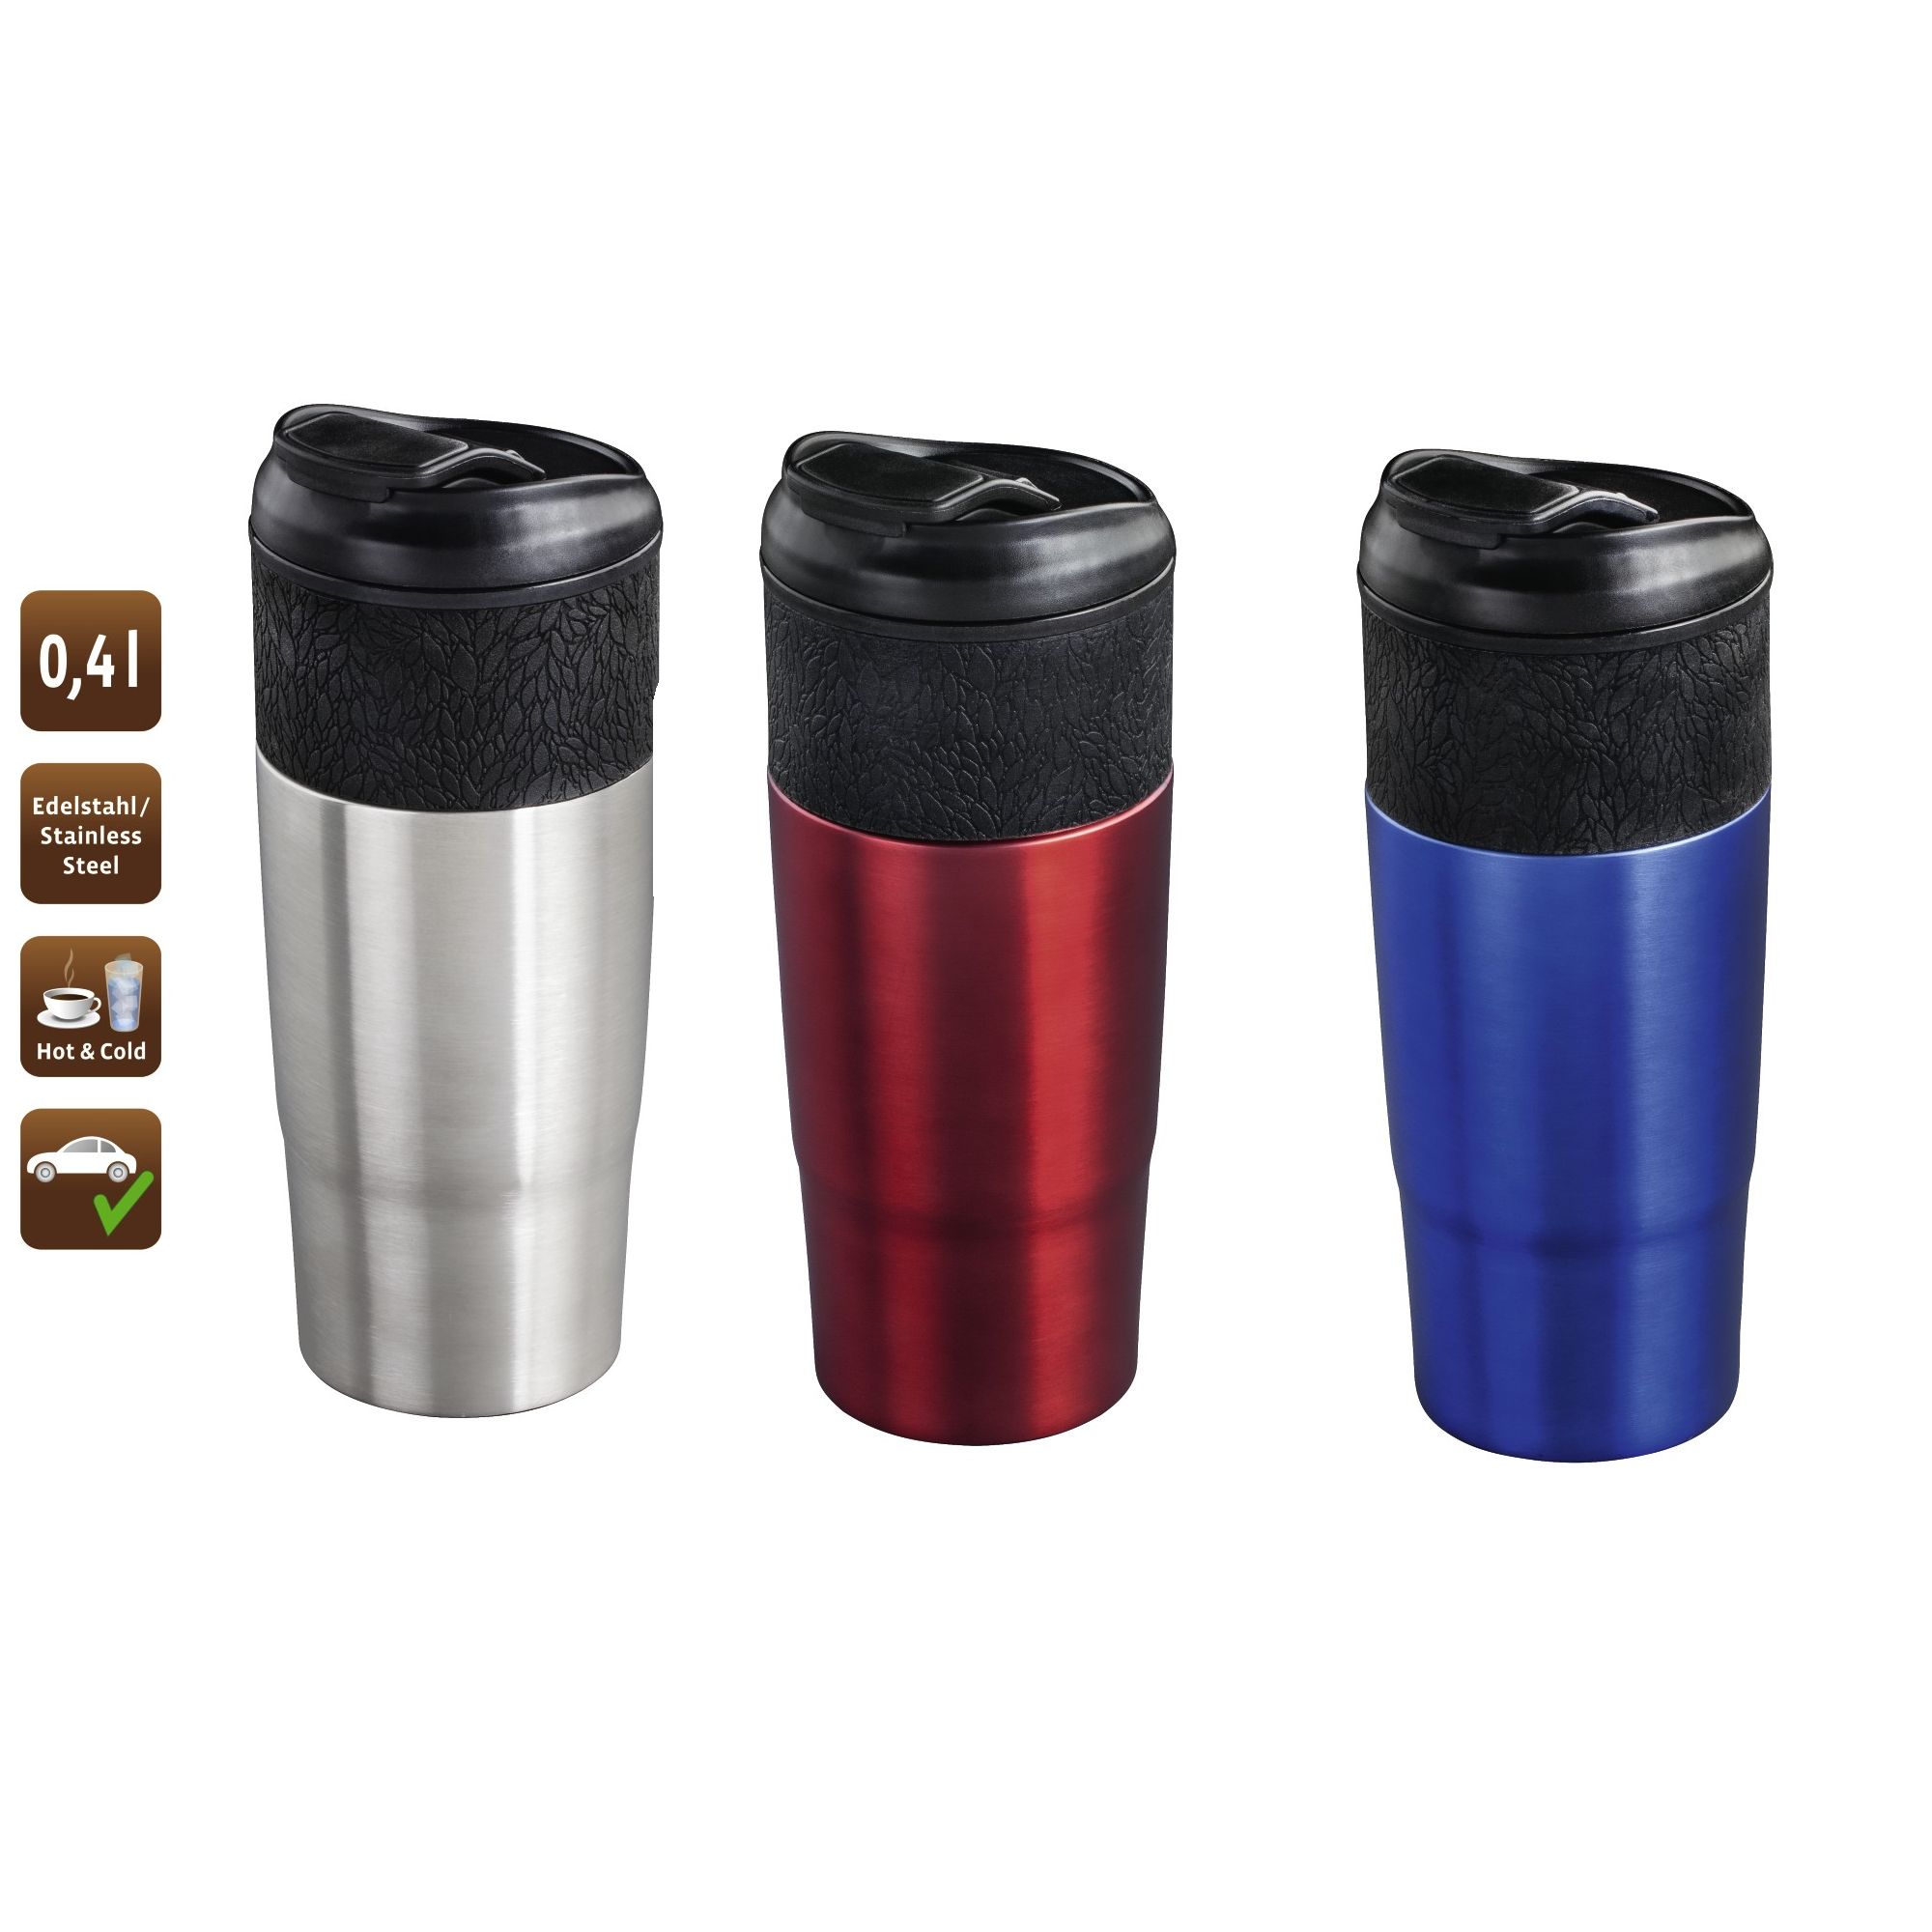 INSULATED THERMAL TRAVEL COFFEE FLASK MUG REMOVABLE LID KEEP DRINK WARM NEW P/&P